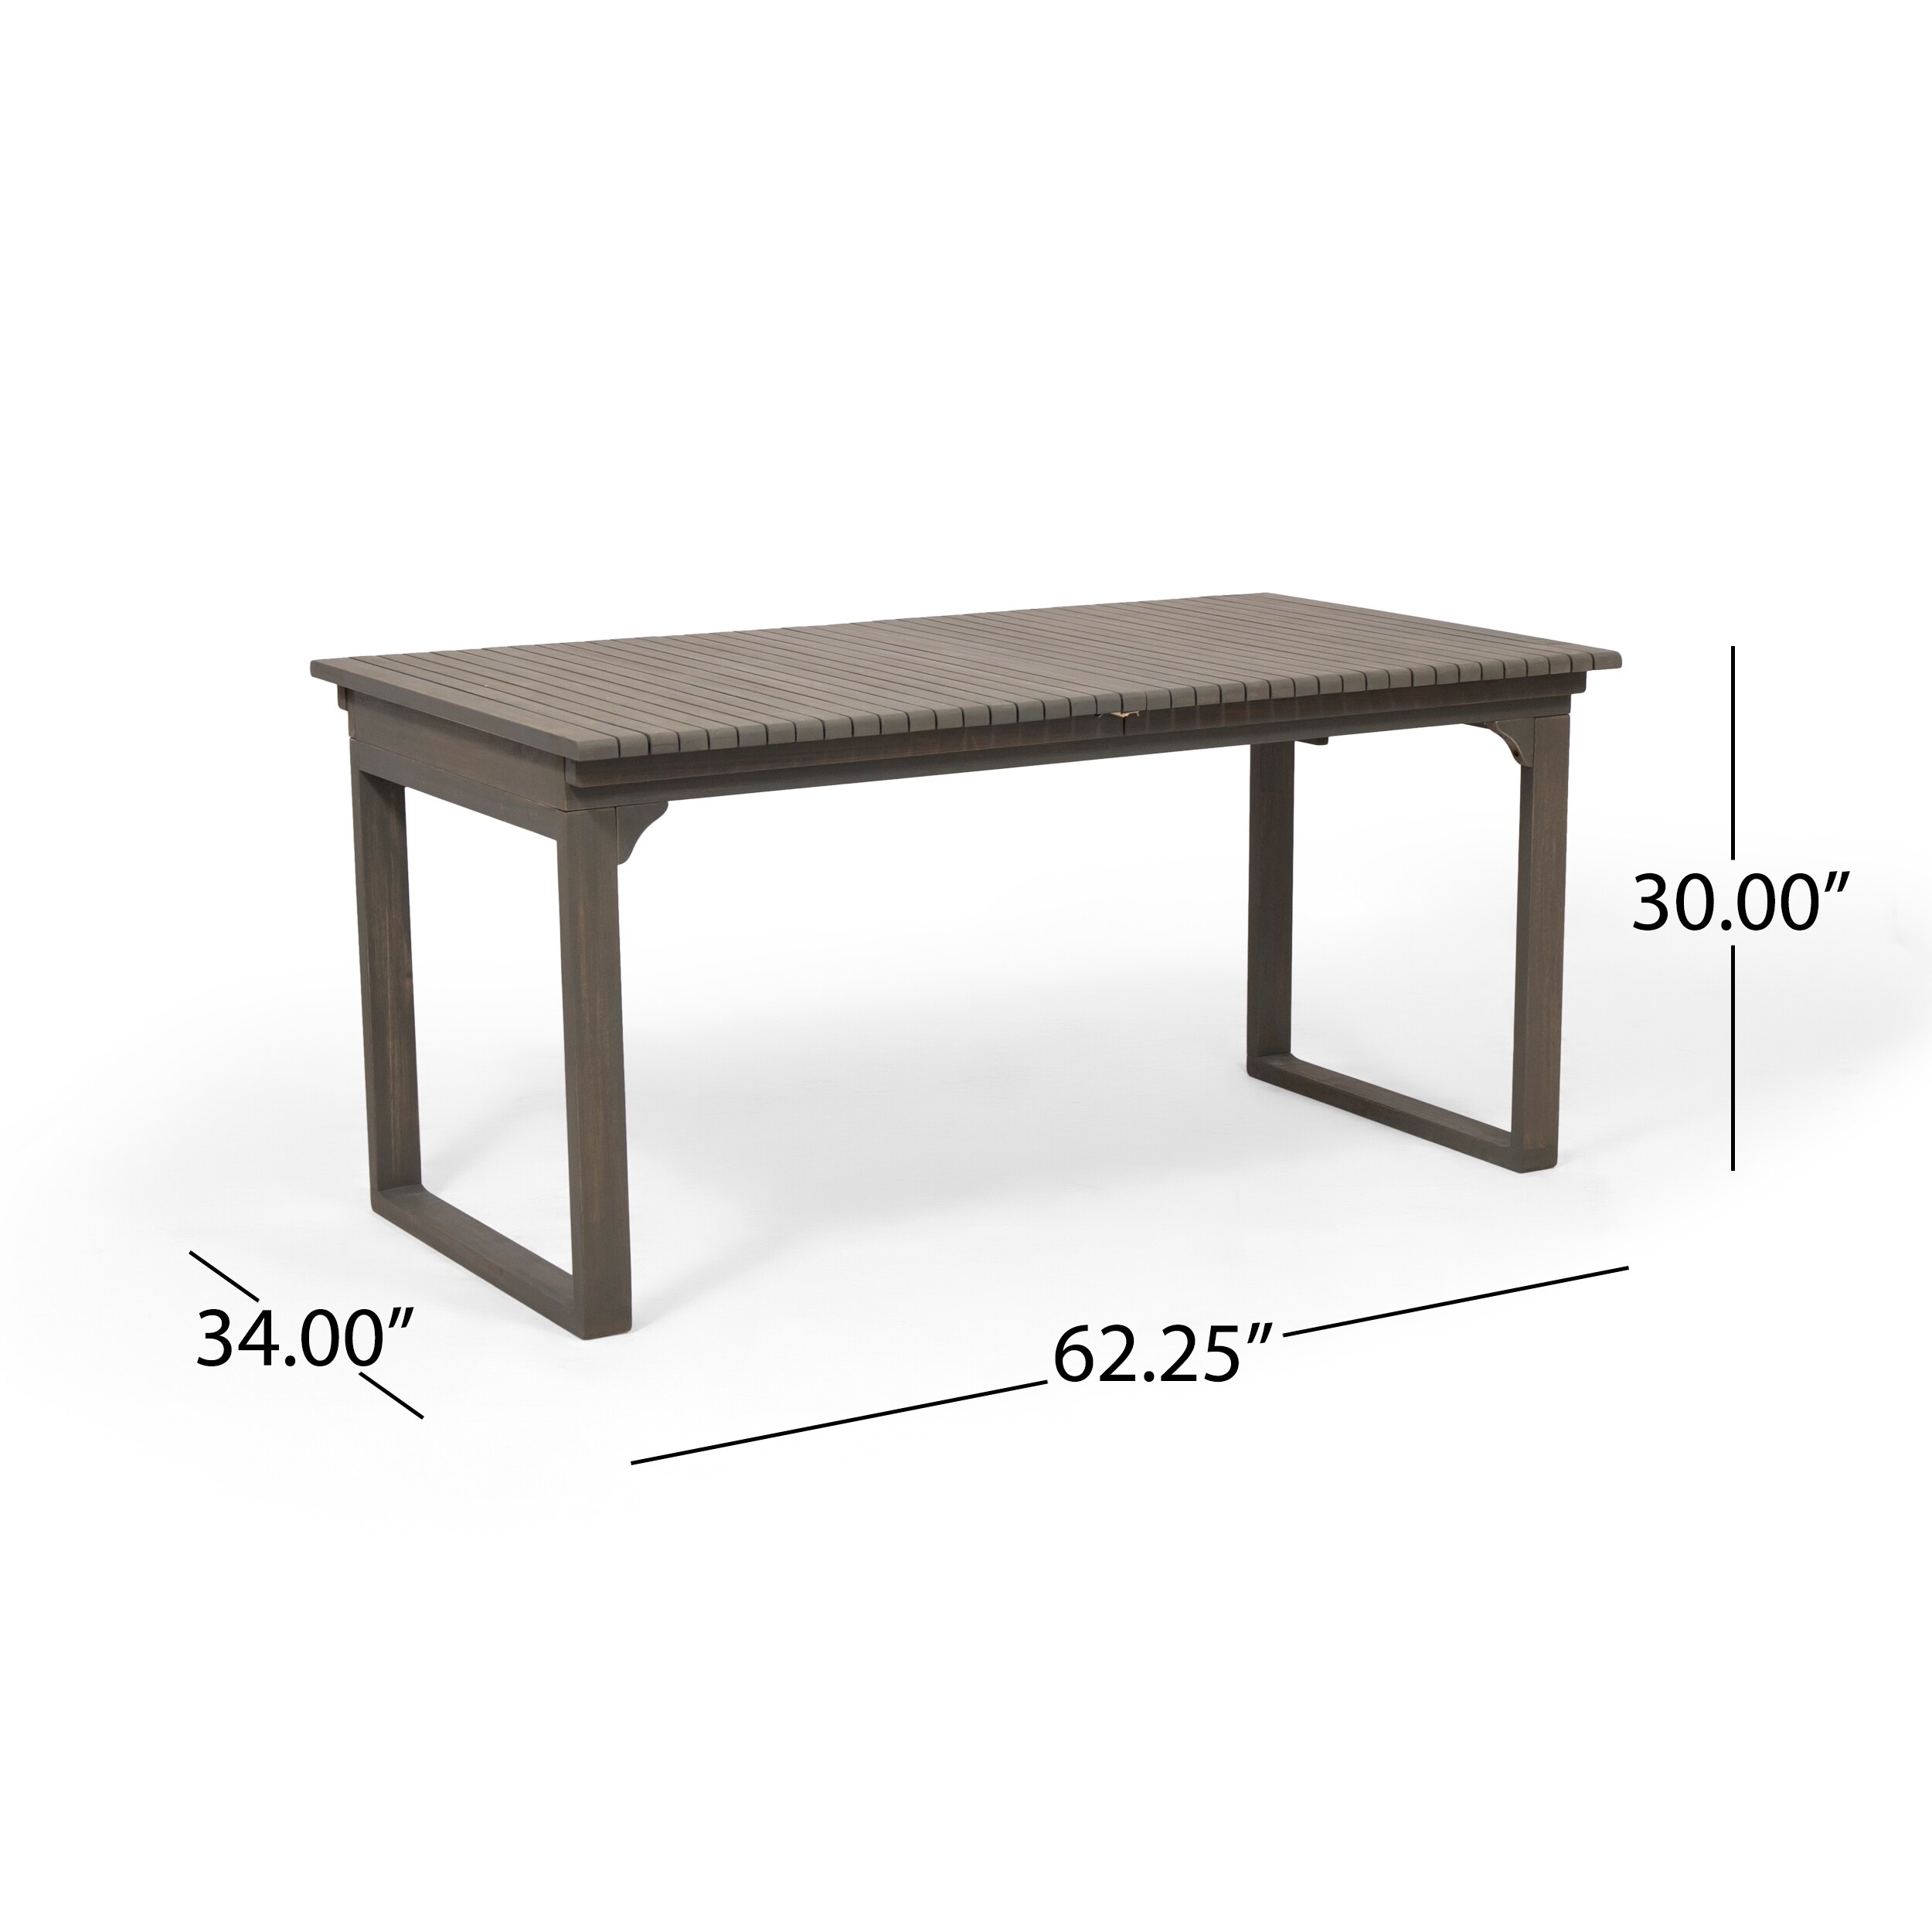 Sorrento Outdoor Wood Dining Table by Christopher Knight Home - 62.25" L x 34.00" W x 30.00" H